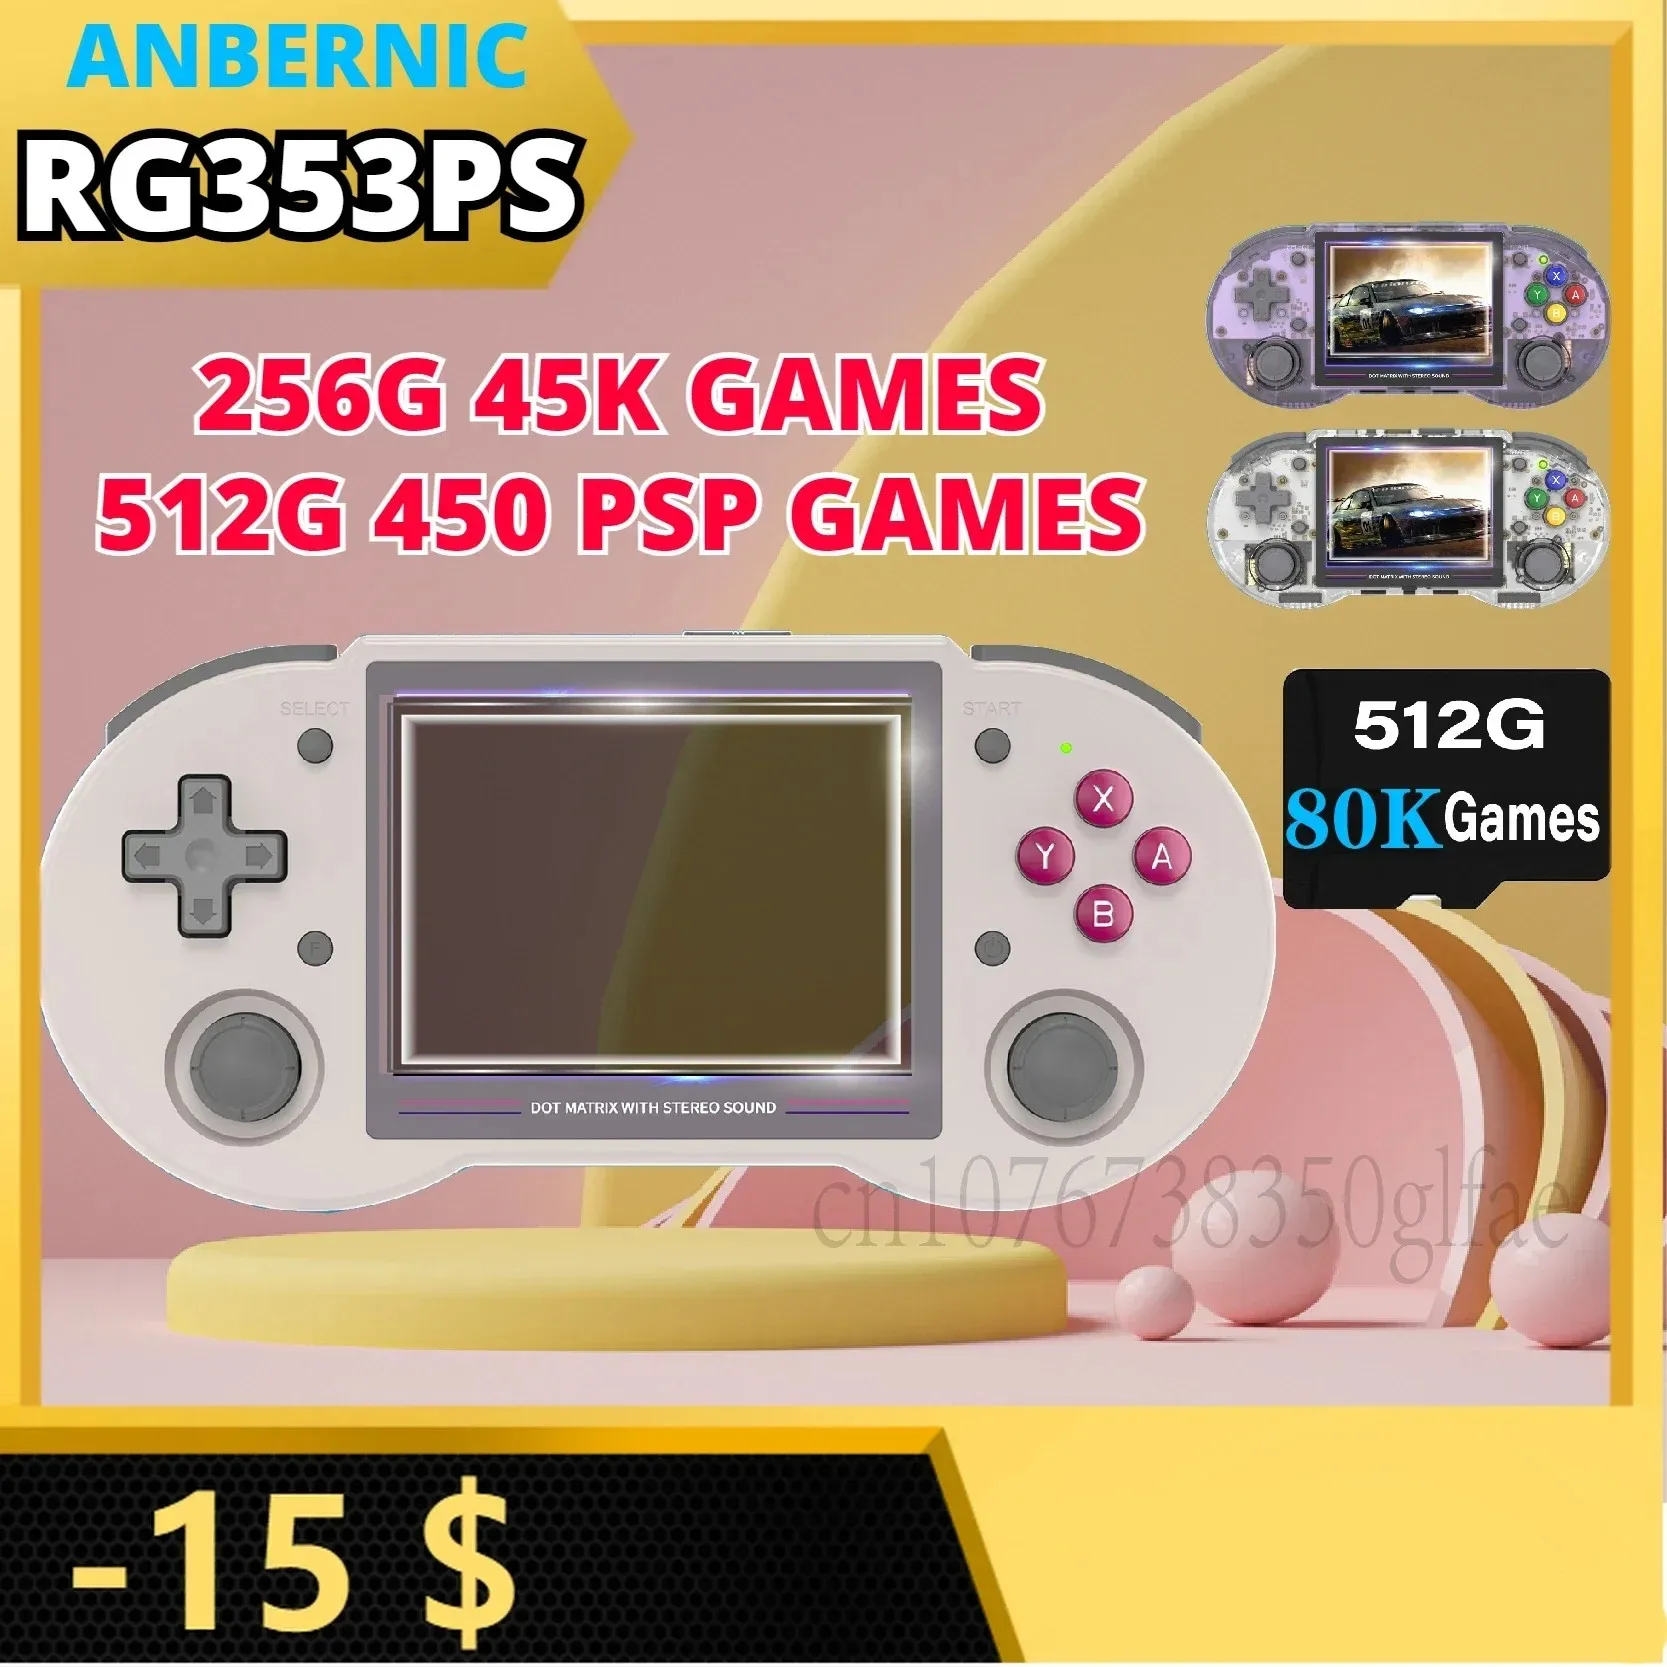 

ANBERNIC RG353PS Handheld Game Console Portable PSP RK3566 3.5 INCH IPS SCREEN Android Linux OS HD Video Games PS1 PSP 450 GAMES